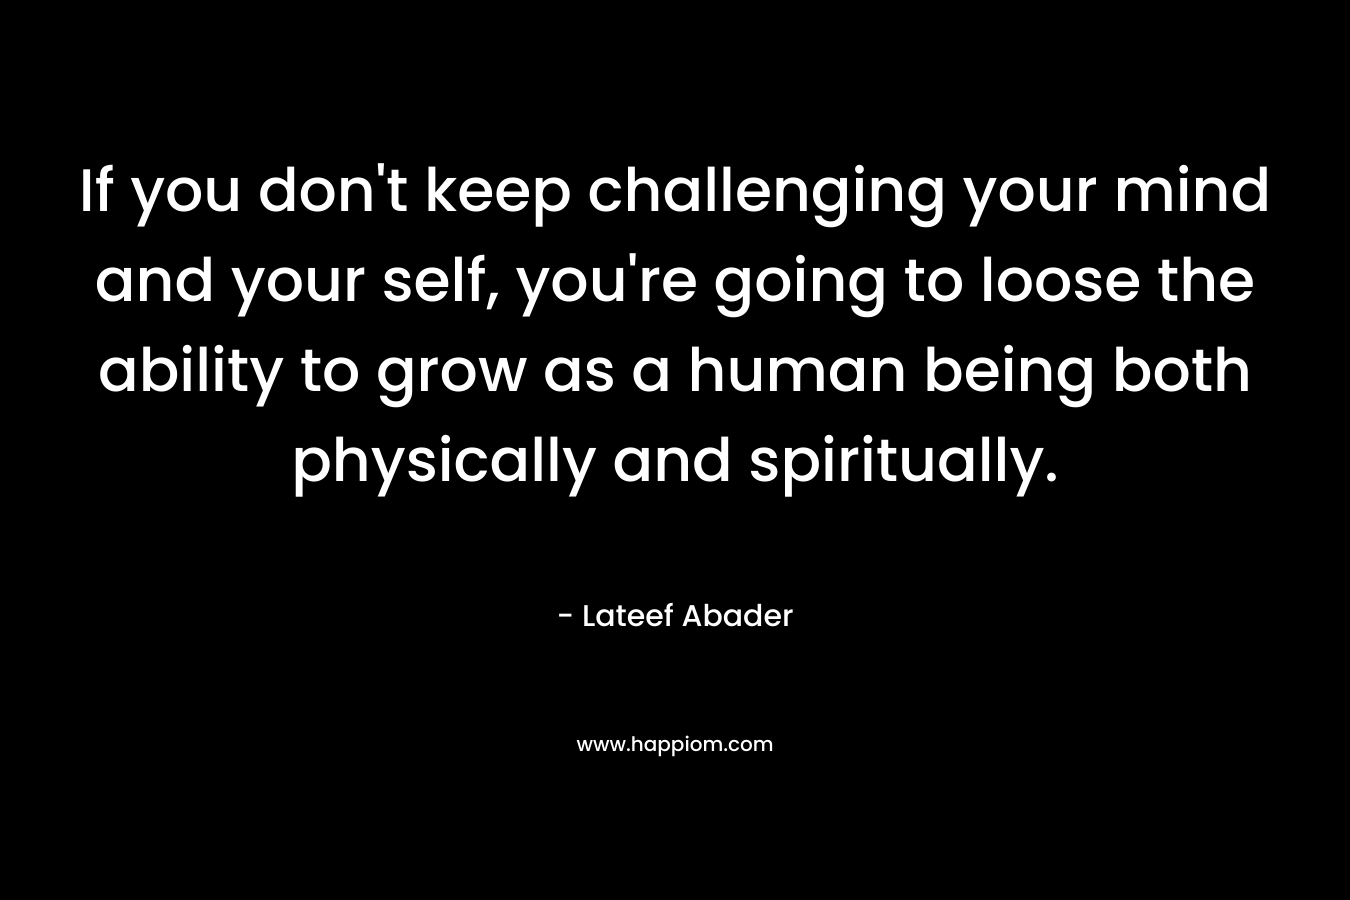 If you don't keep challenging your mind and your self, you're going to loose the ability to grow as a human being both physically and spiritually.